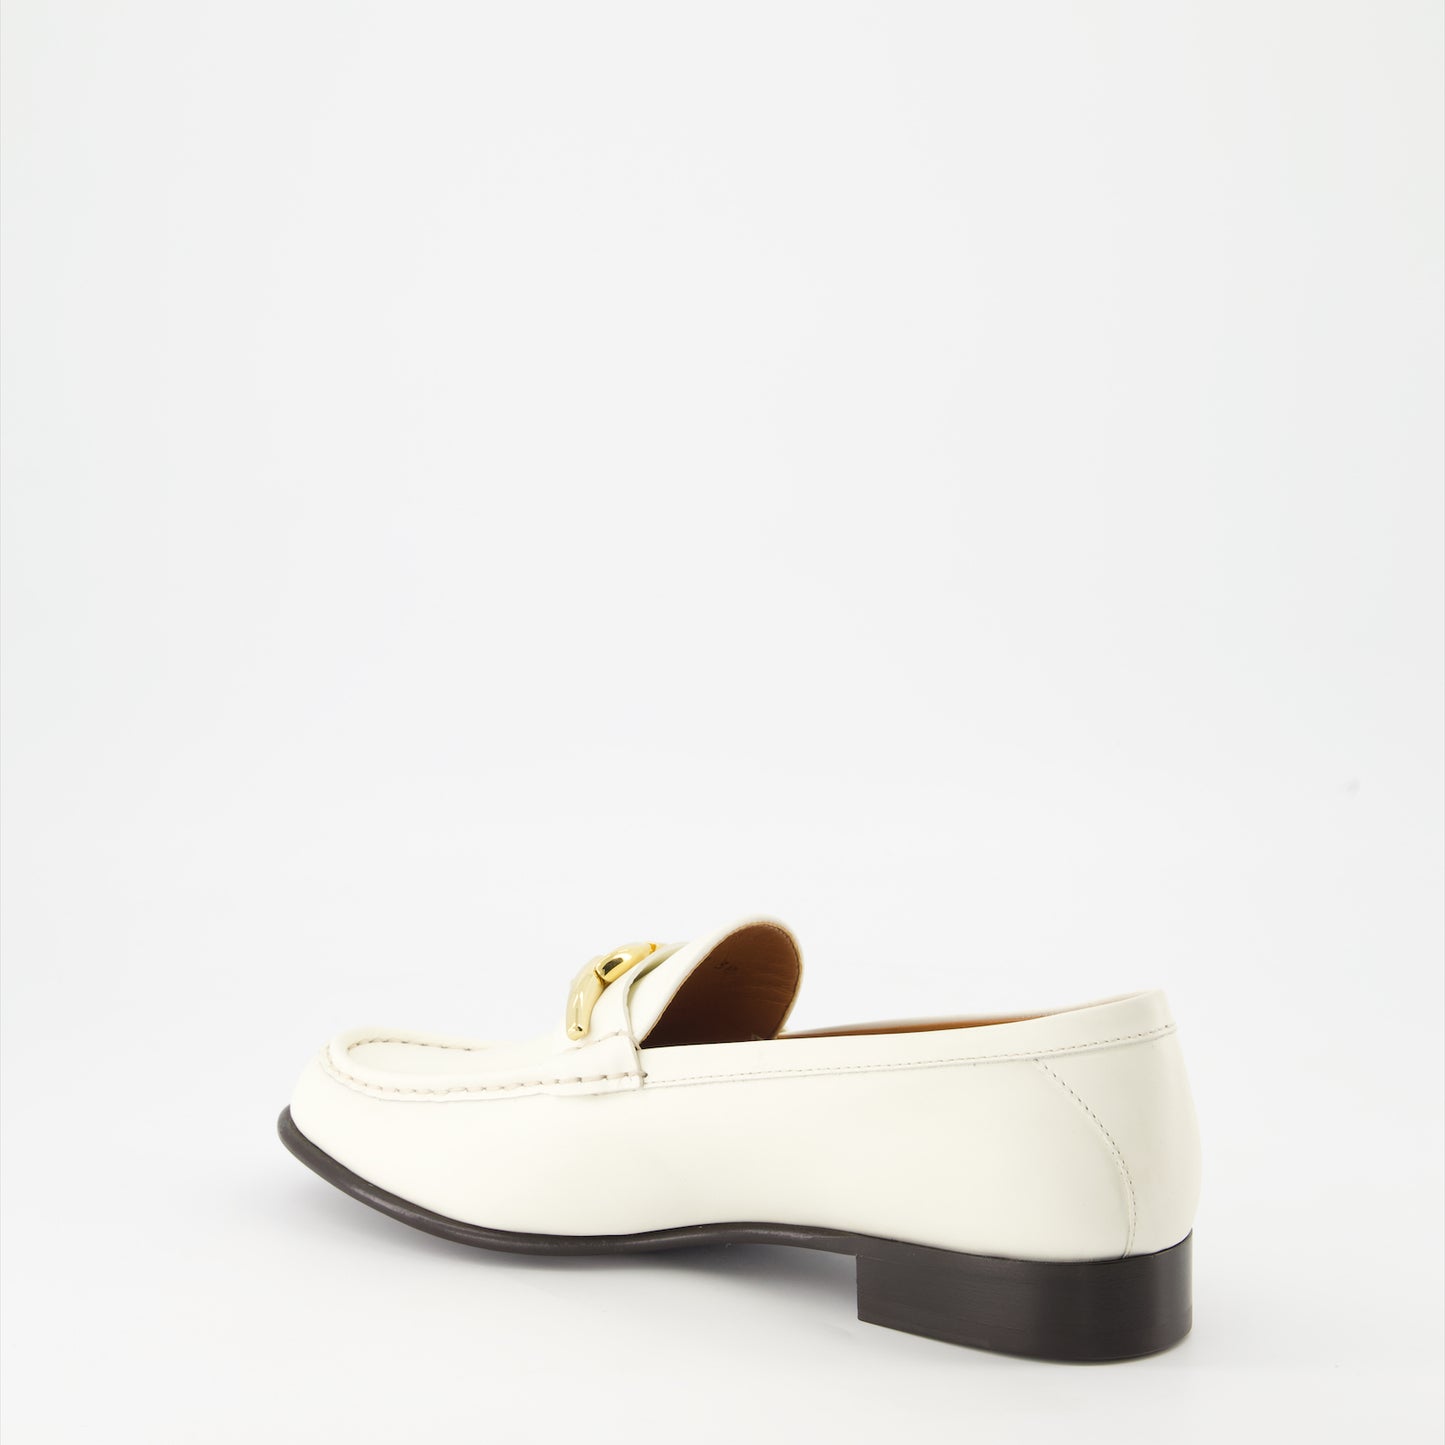 VLogo Signature loafers in smooth leather